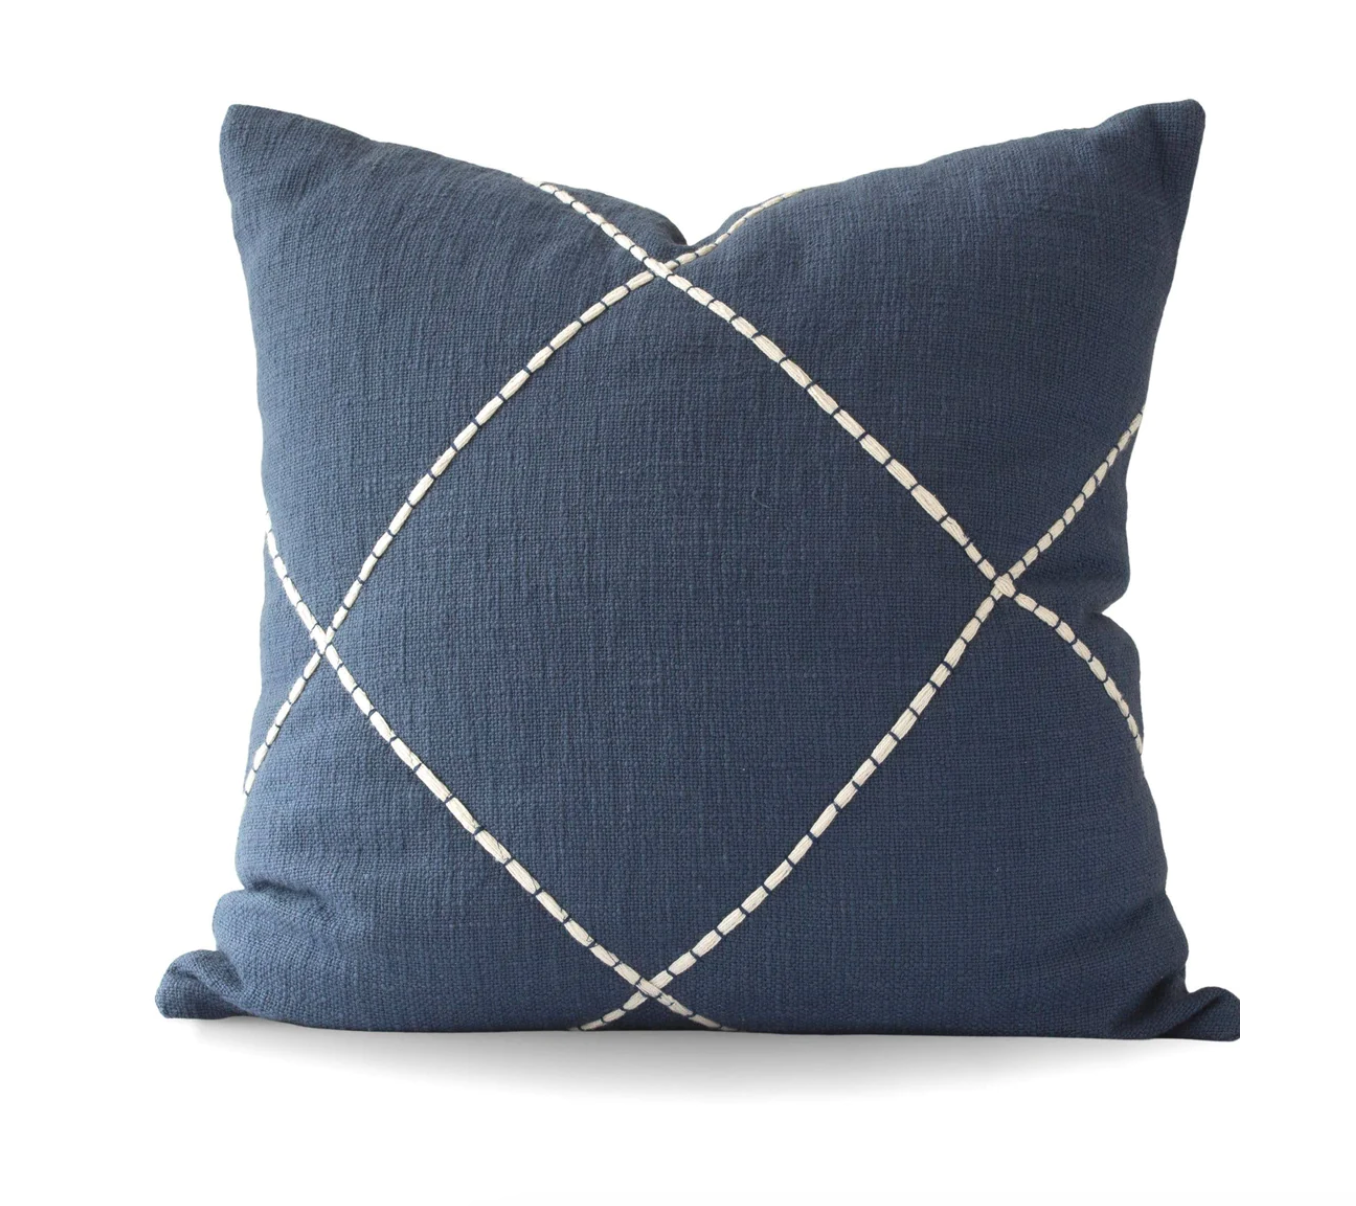 Criss Cross Embroidered Pillow Covers